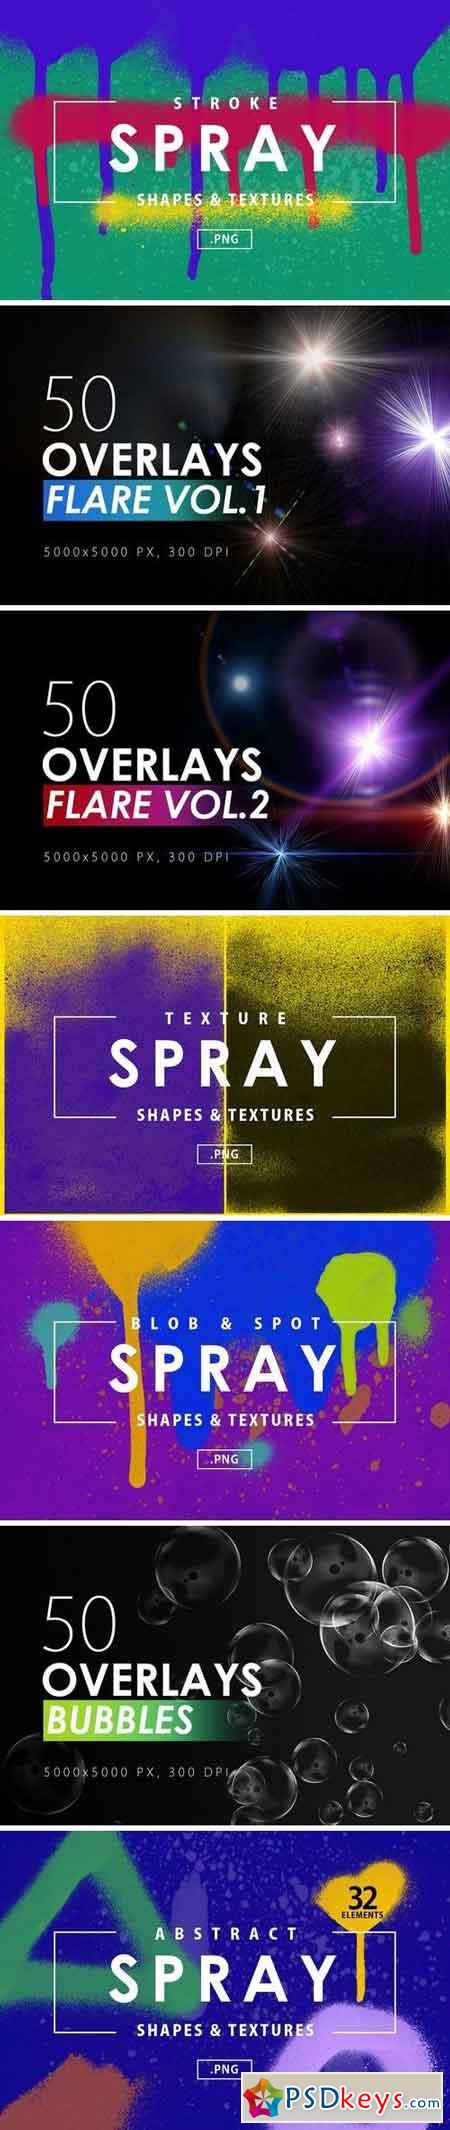 Abstract Spray Shapes and Overlays Bundle